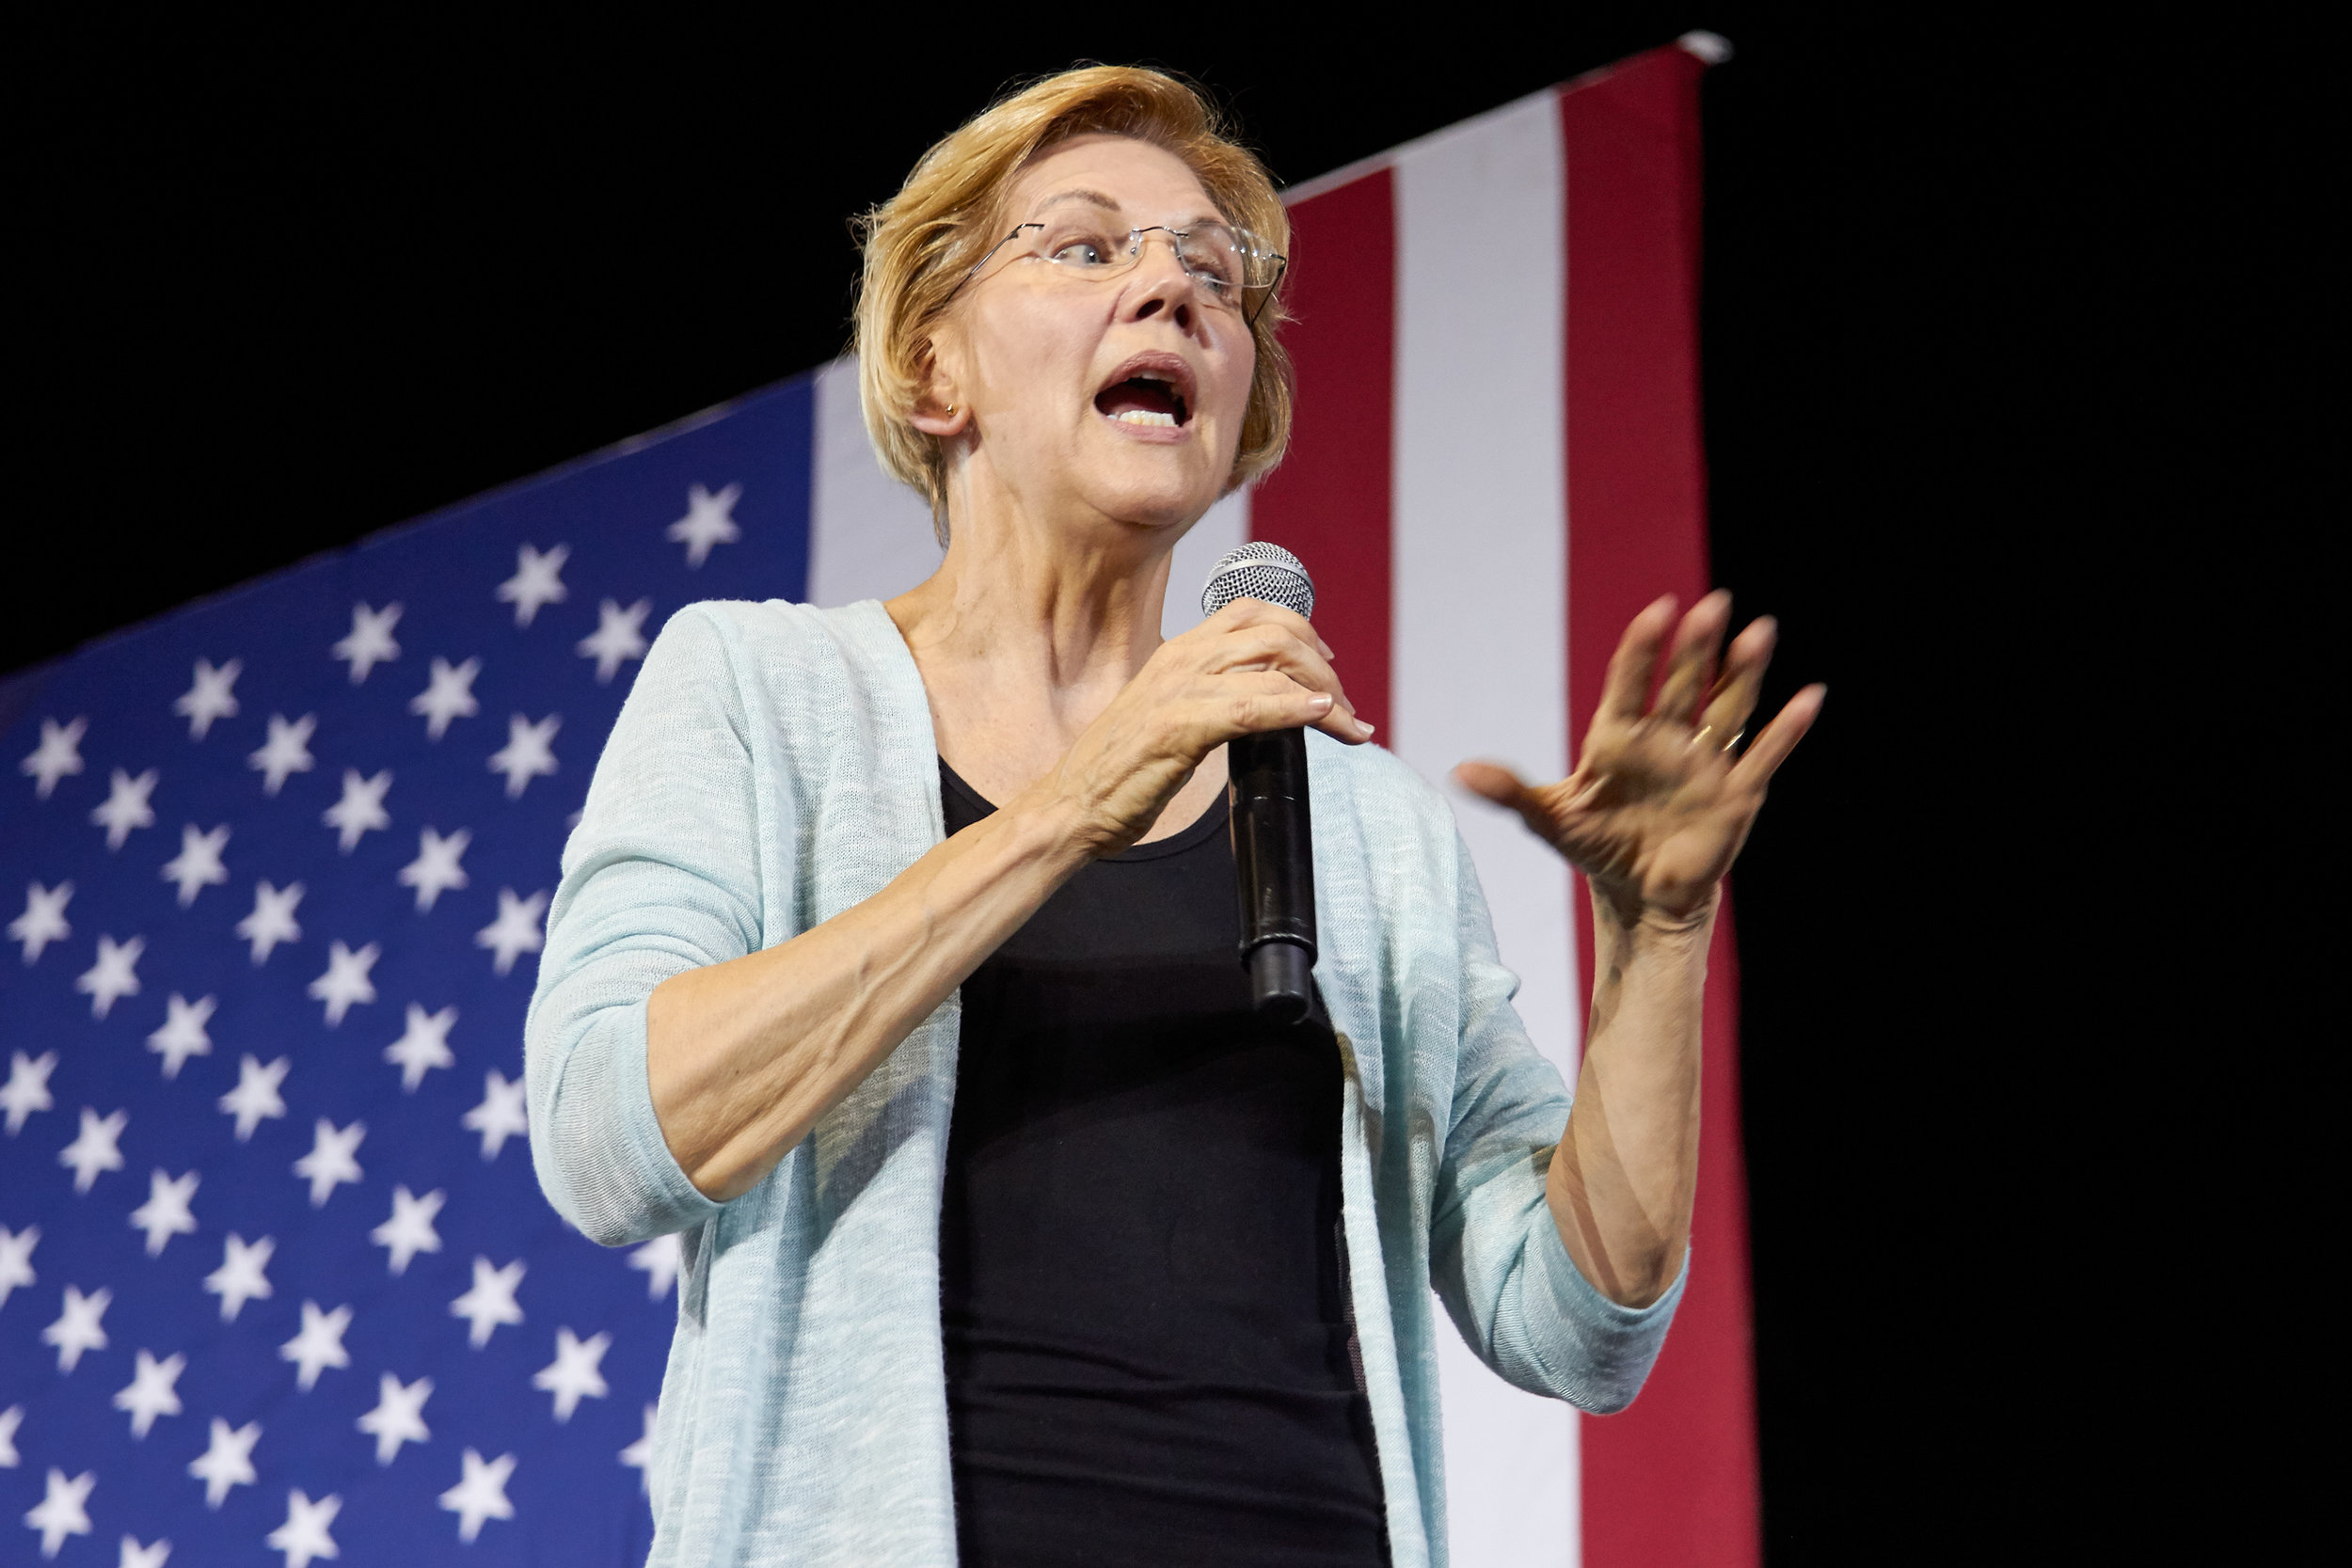  Massachusetts senator Elizabeth Warren speaks at a Town Hall event for her presidential campaign, at the Shrine Expo Hall, Los Angeles, California, on August 21st 2019. (Marco Pallotti/The Corsair) 